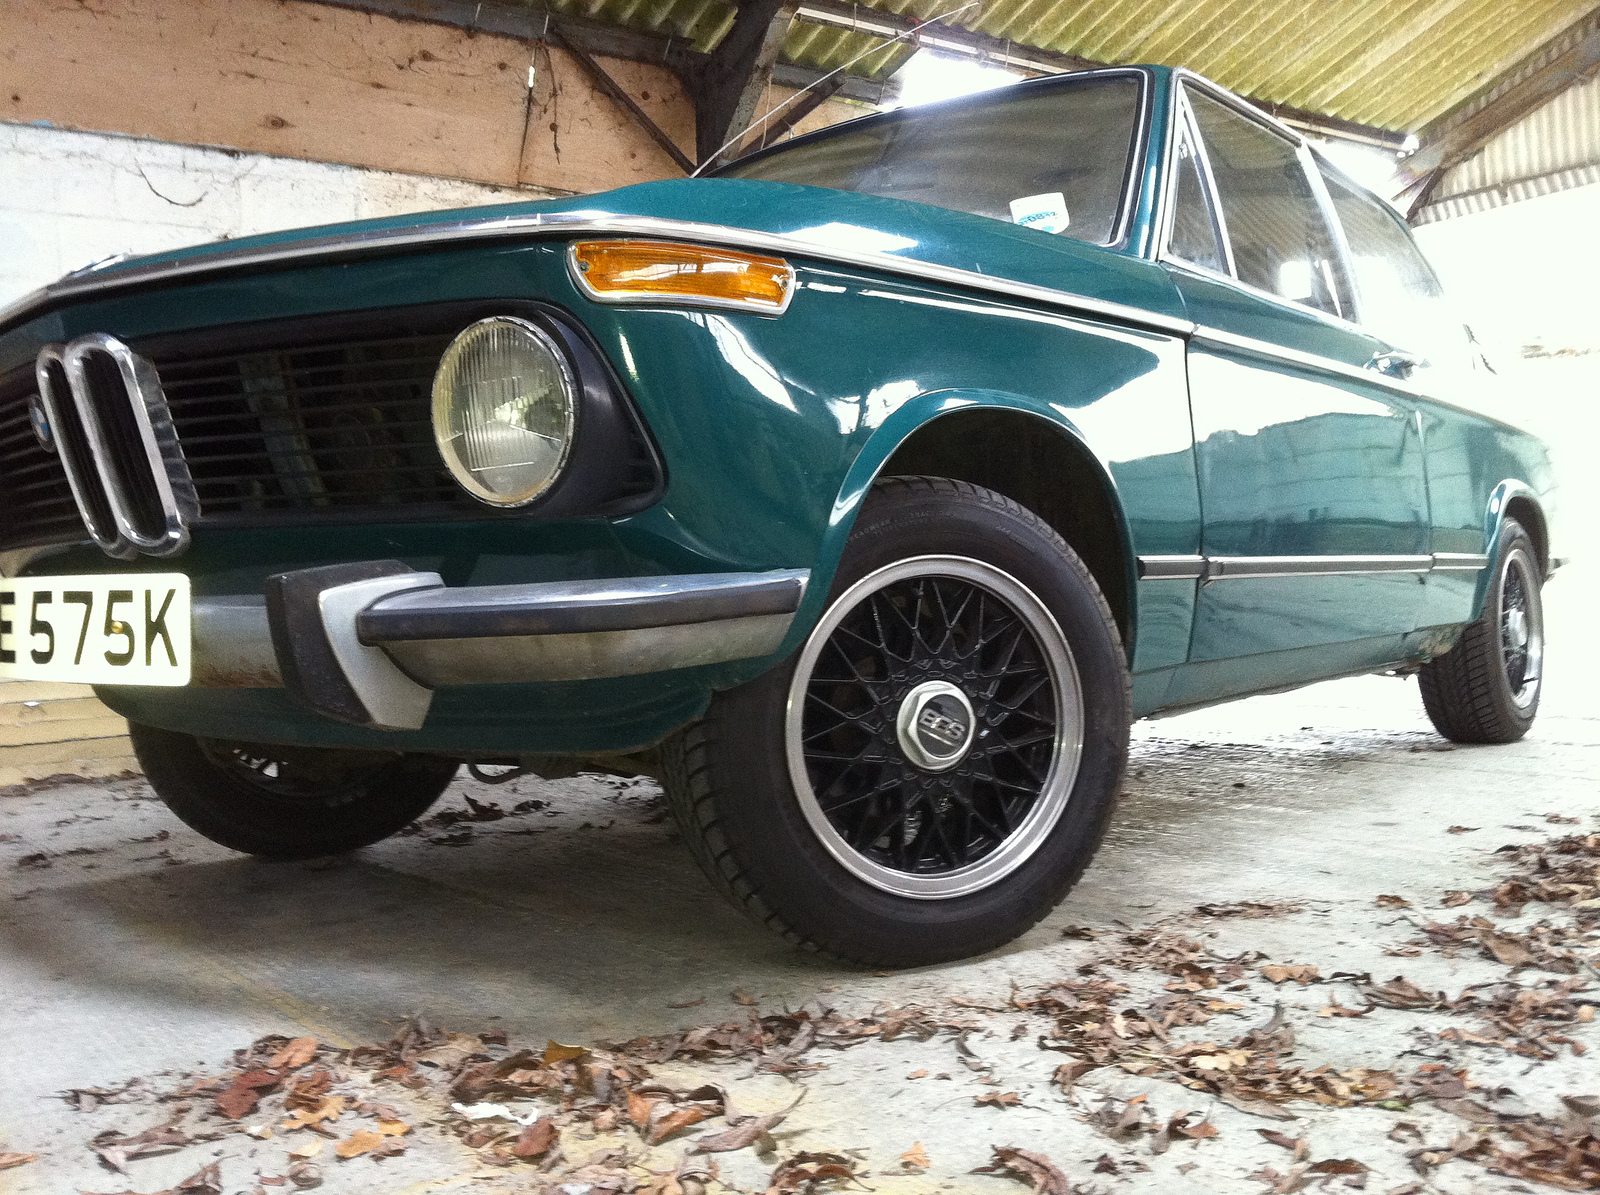 bmw 2000 touring 1971 | Flickr - Photo Sharing!